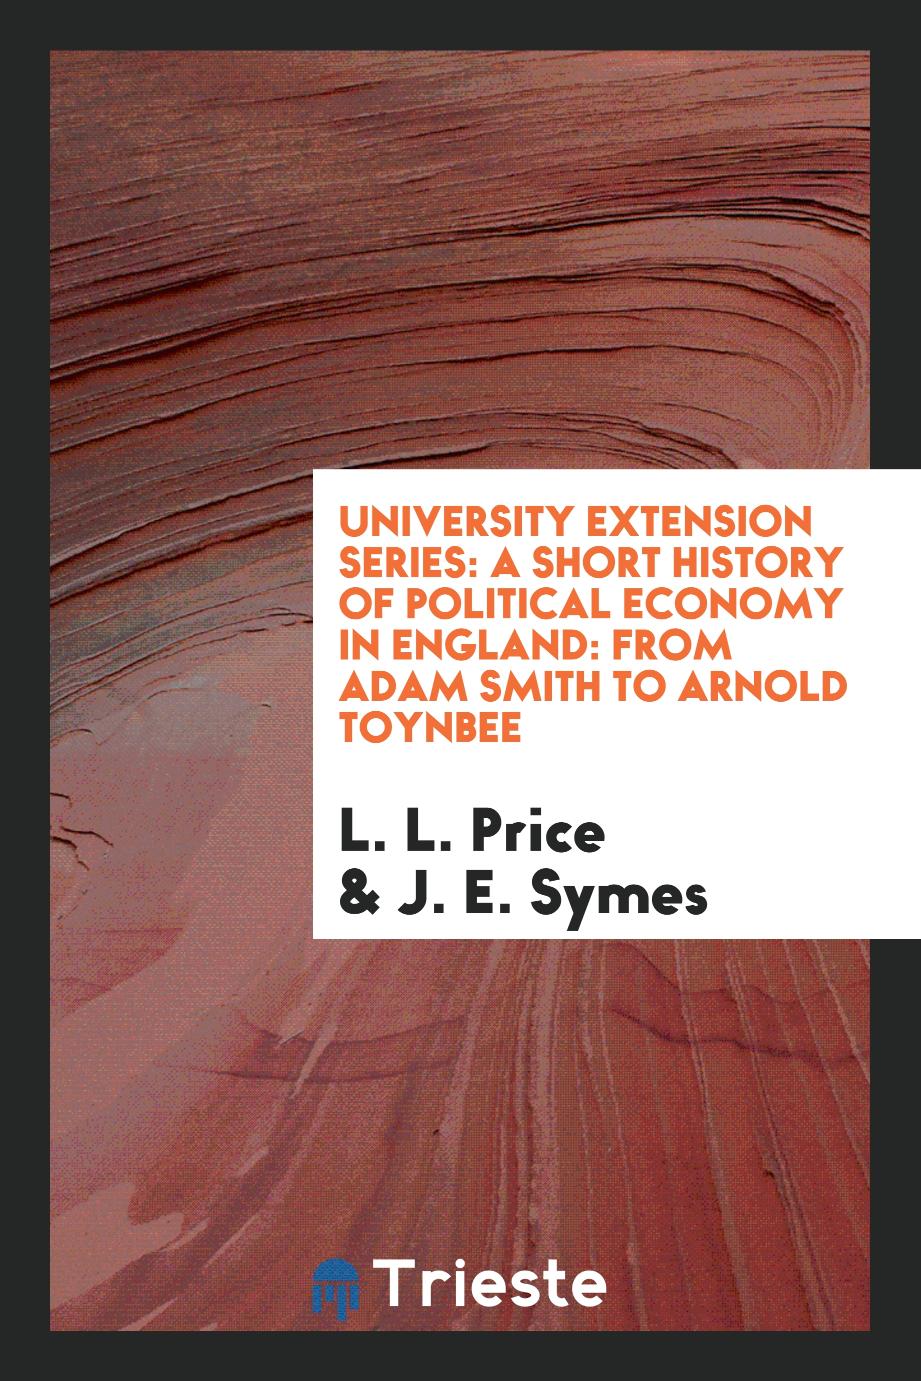 University Extension Series: A Short History of Political Economy in England: From Adam Smith to Arnold Toynbee